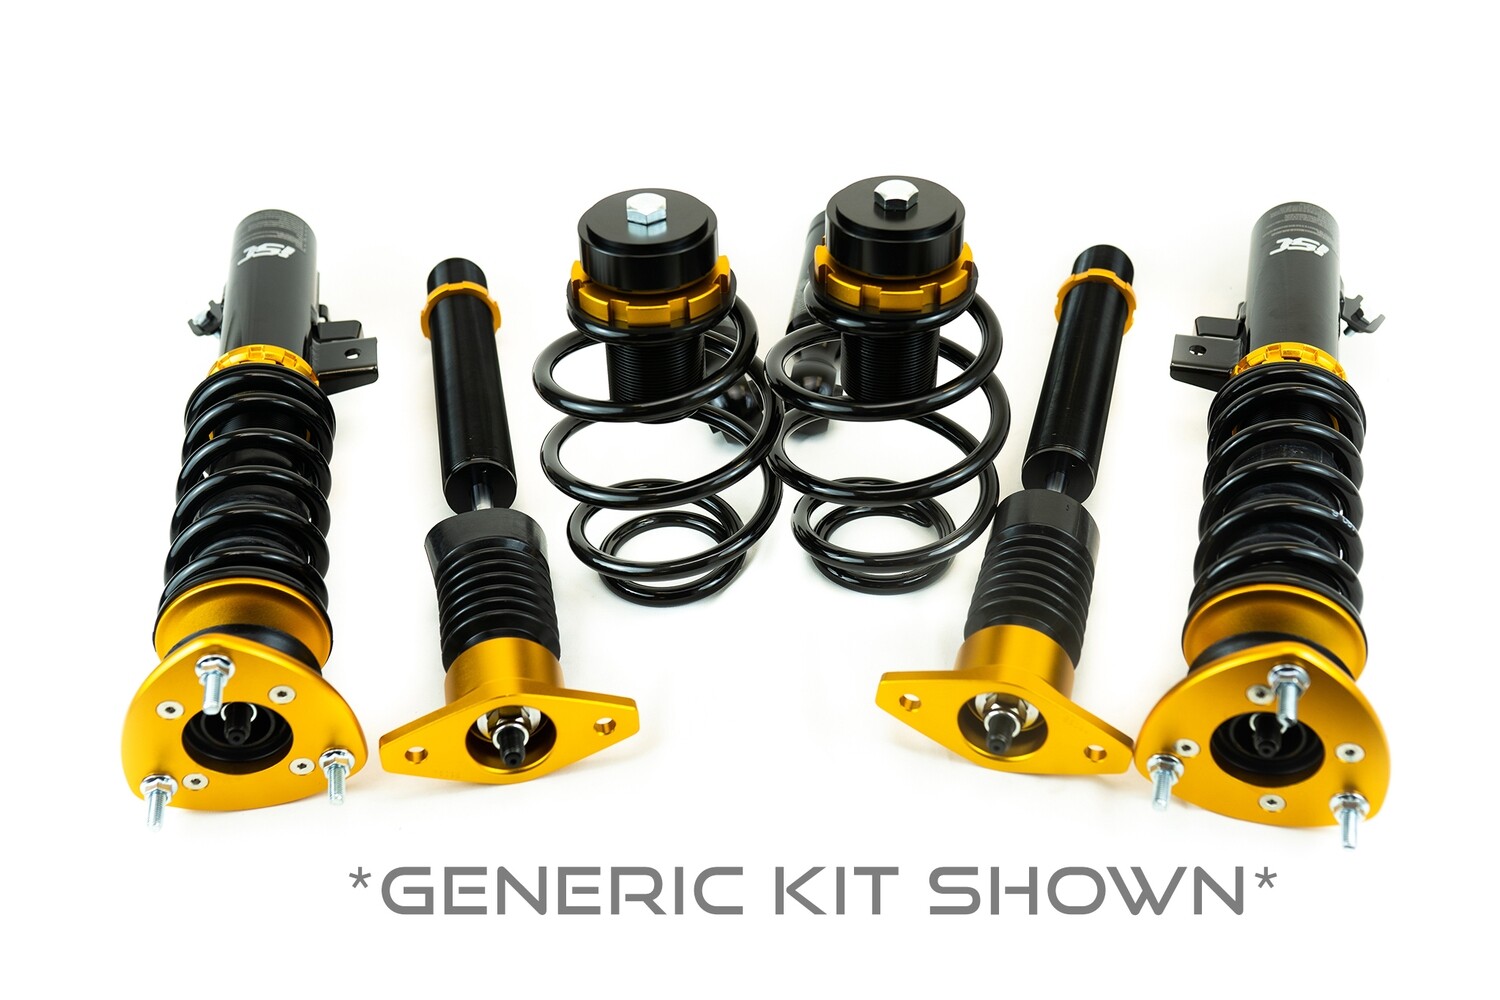 Volkswagen MK6 Golf R AWD (55mm Strut) ISC V2 Basic Coilover Suspension With Coilover Covers